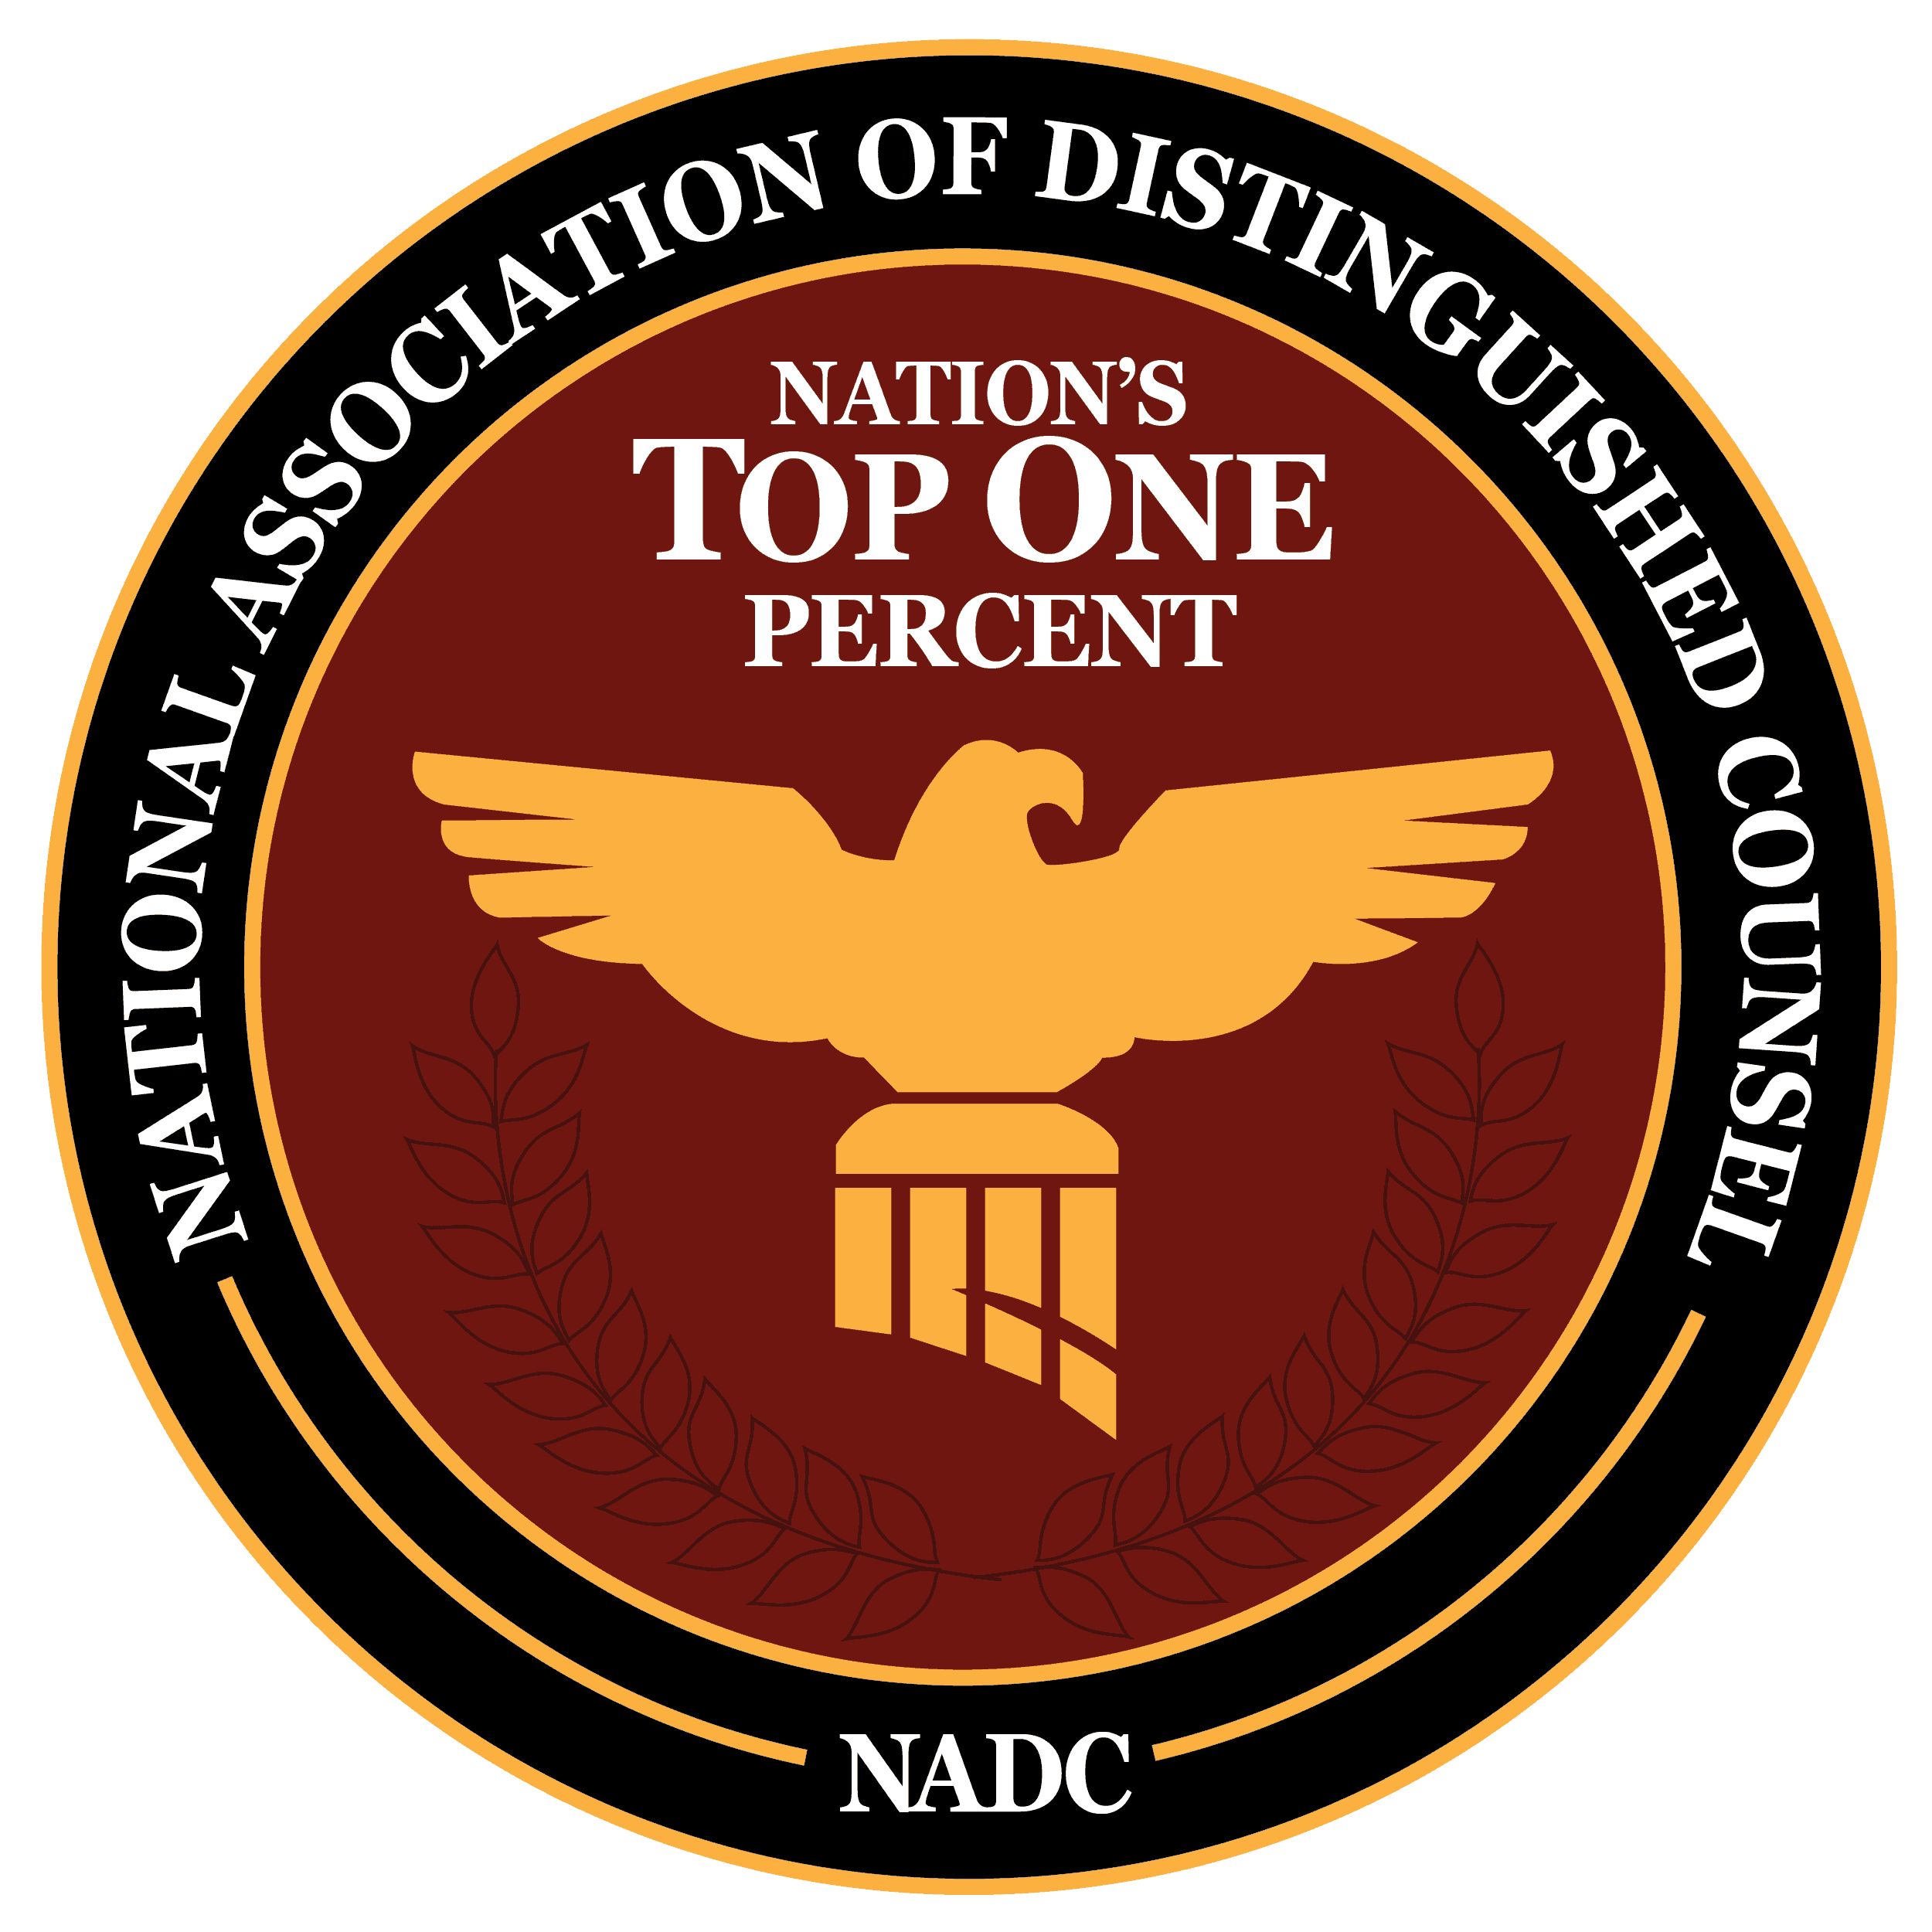 National Association of Distinguished Counsel - NADC Logo - Nation's Top One Percent